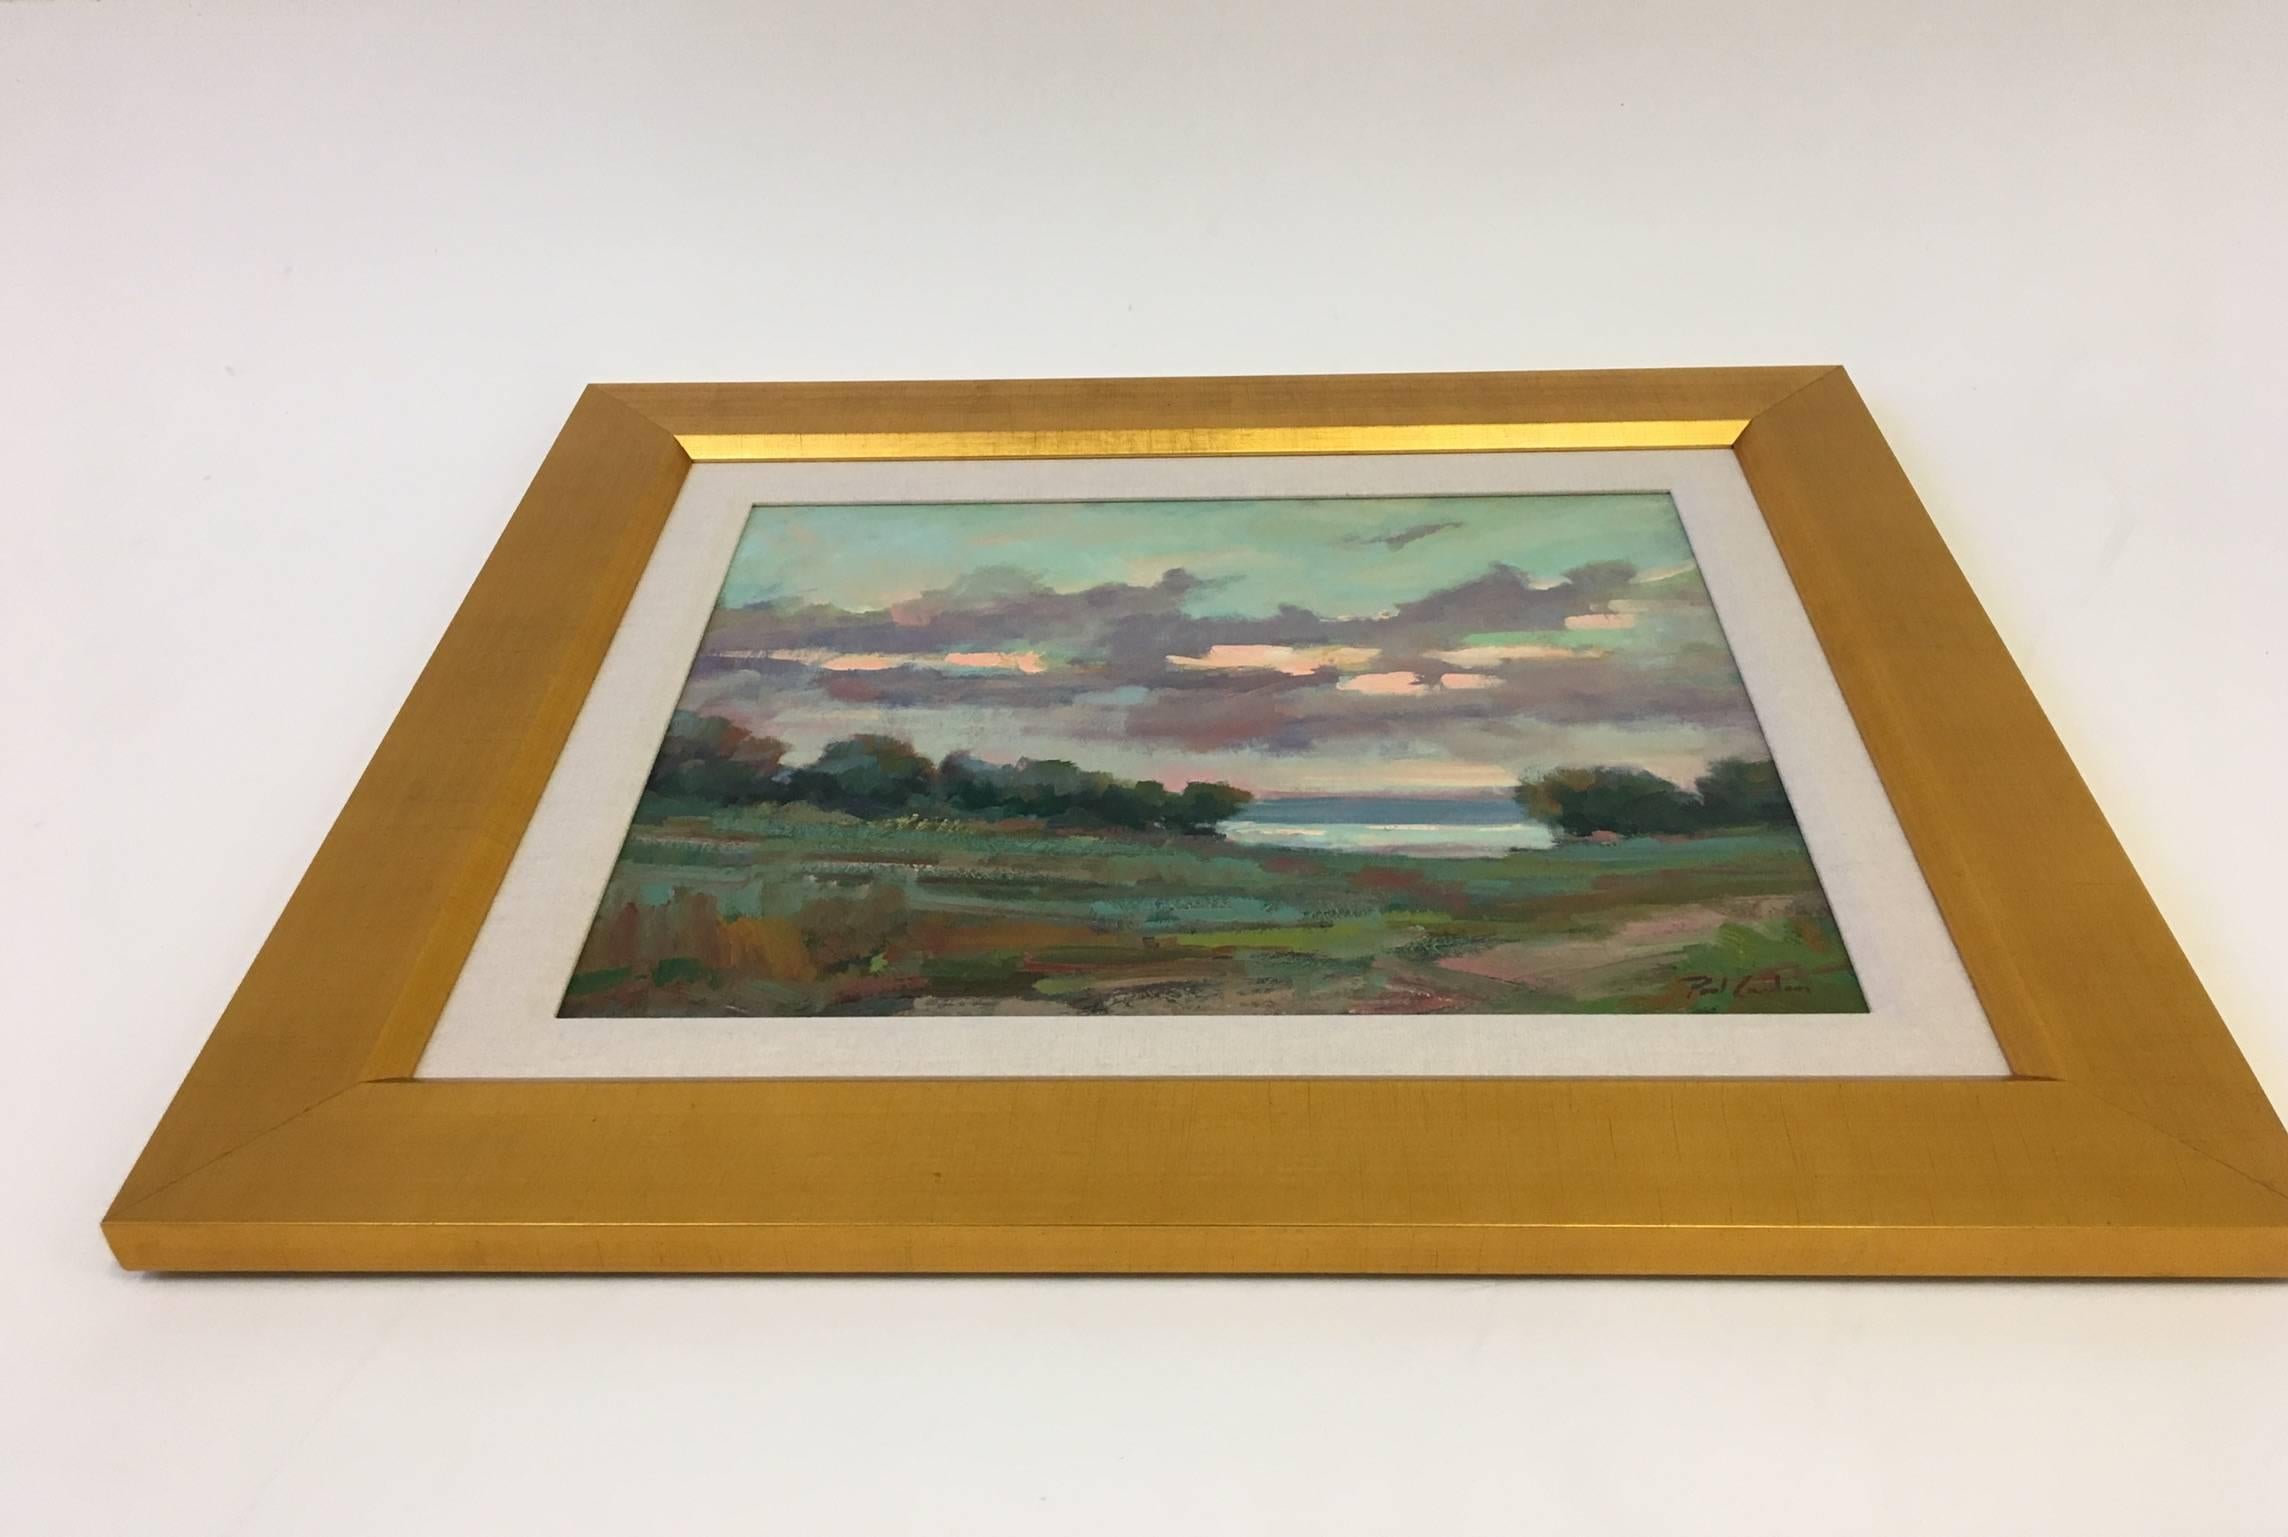 Modern Original Oil on Board Landscape Painting by Listed Artis Paul Casebeer